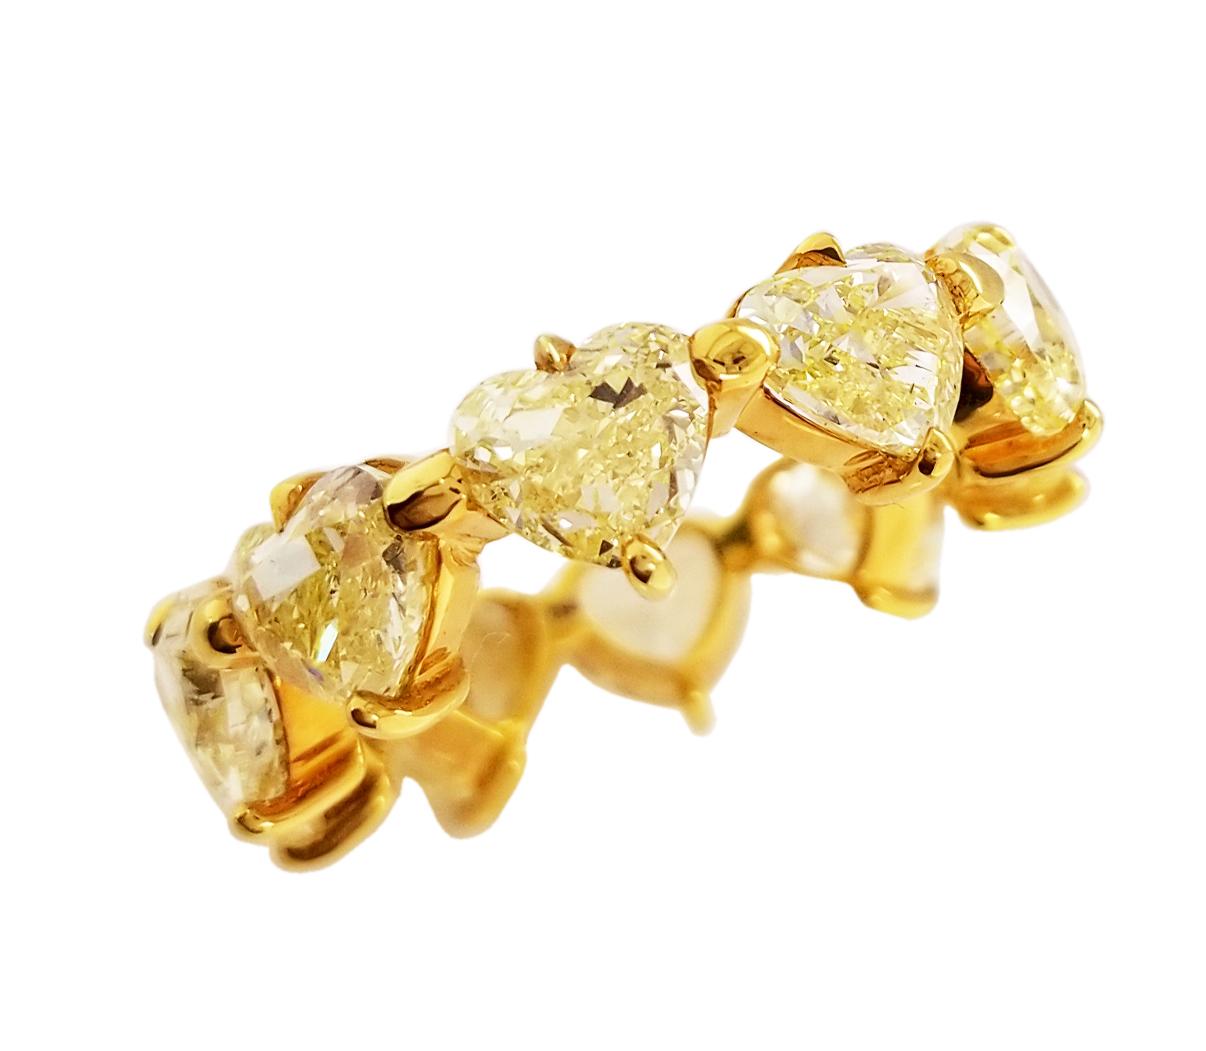 From Scarselli collection this eternal love ring with 10 natural yellow diamonds totaling 7.31 carats mounted in 18k yellow gold setting. For this and other spectacular natural fancy color diamonds see the SCARSELLI Storefront in the 1stDibs Vendor